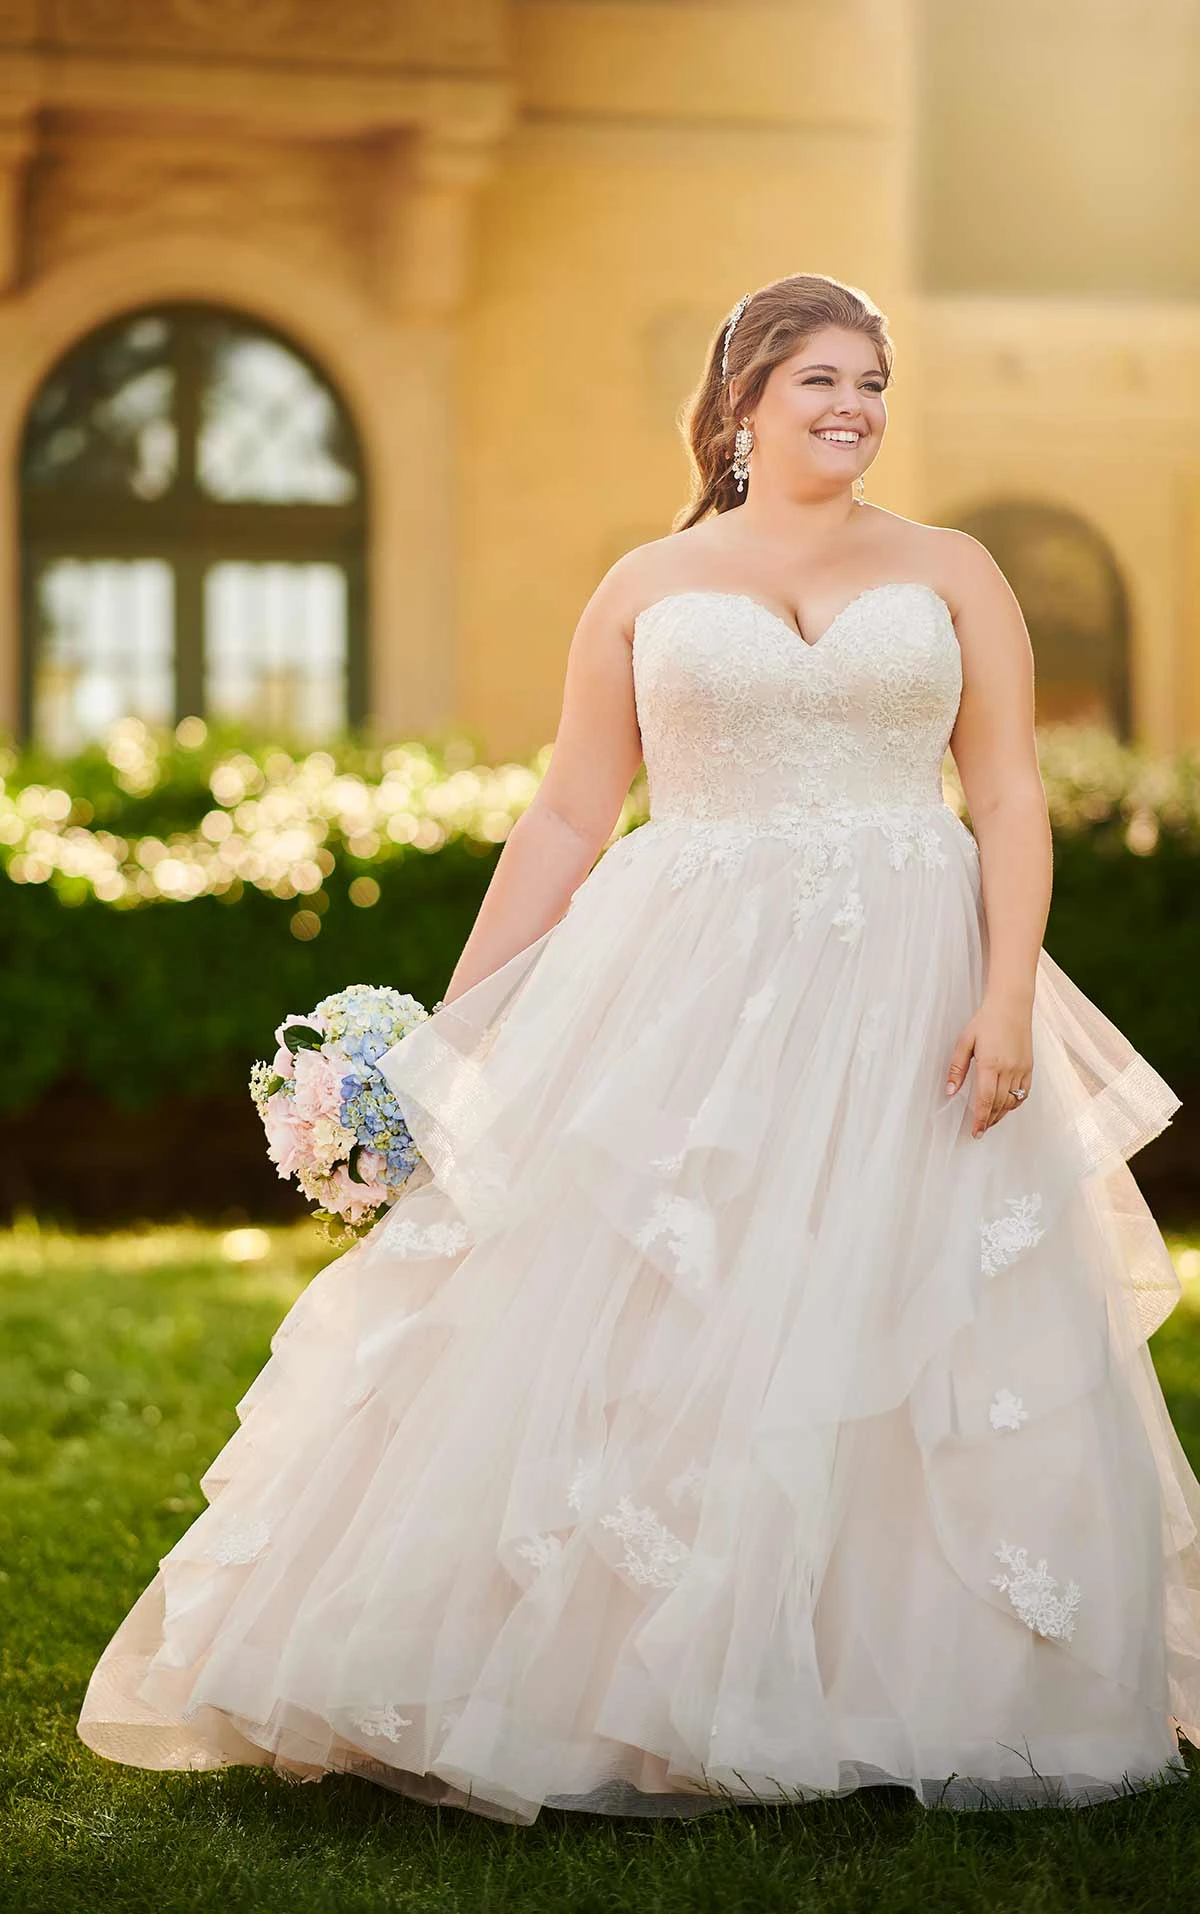 Whimsical Plus Size Ballgown Wedding Dress with Horsehair Trim ...